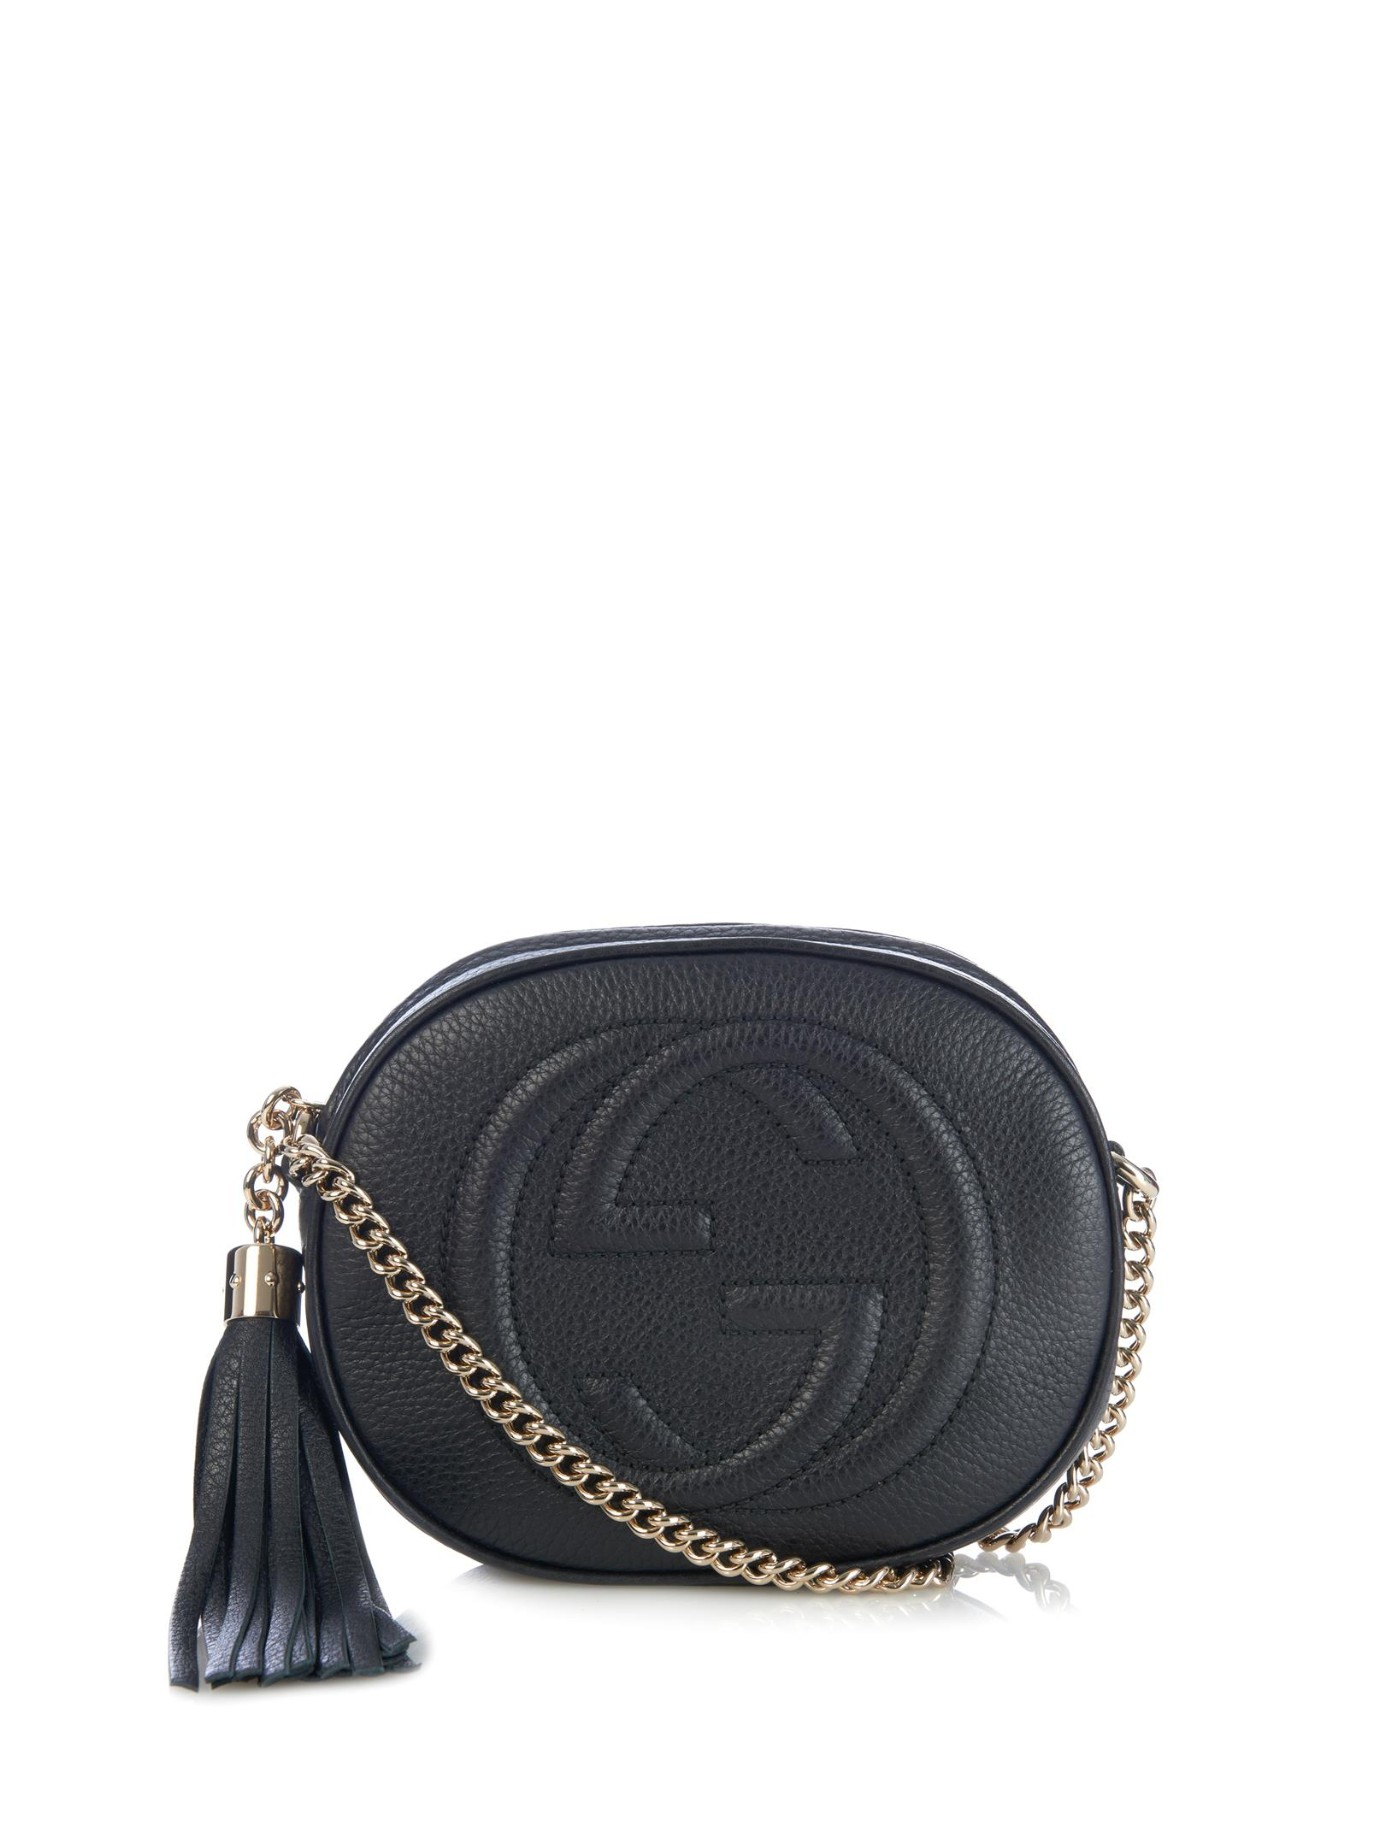 gucci bag with chain strap